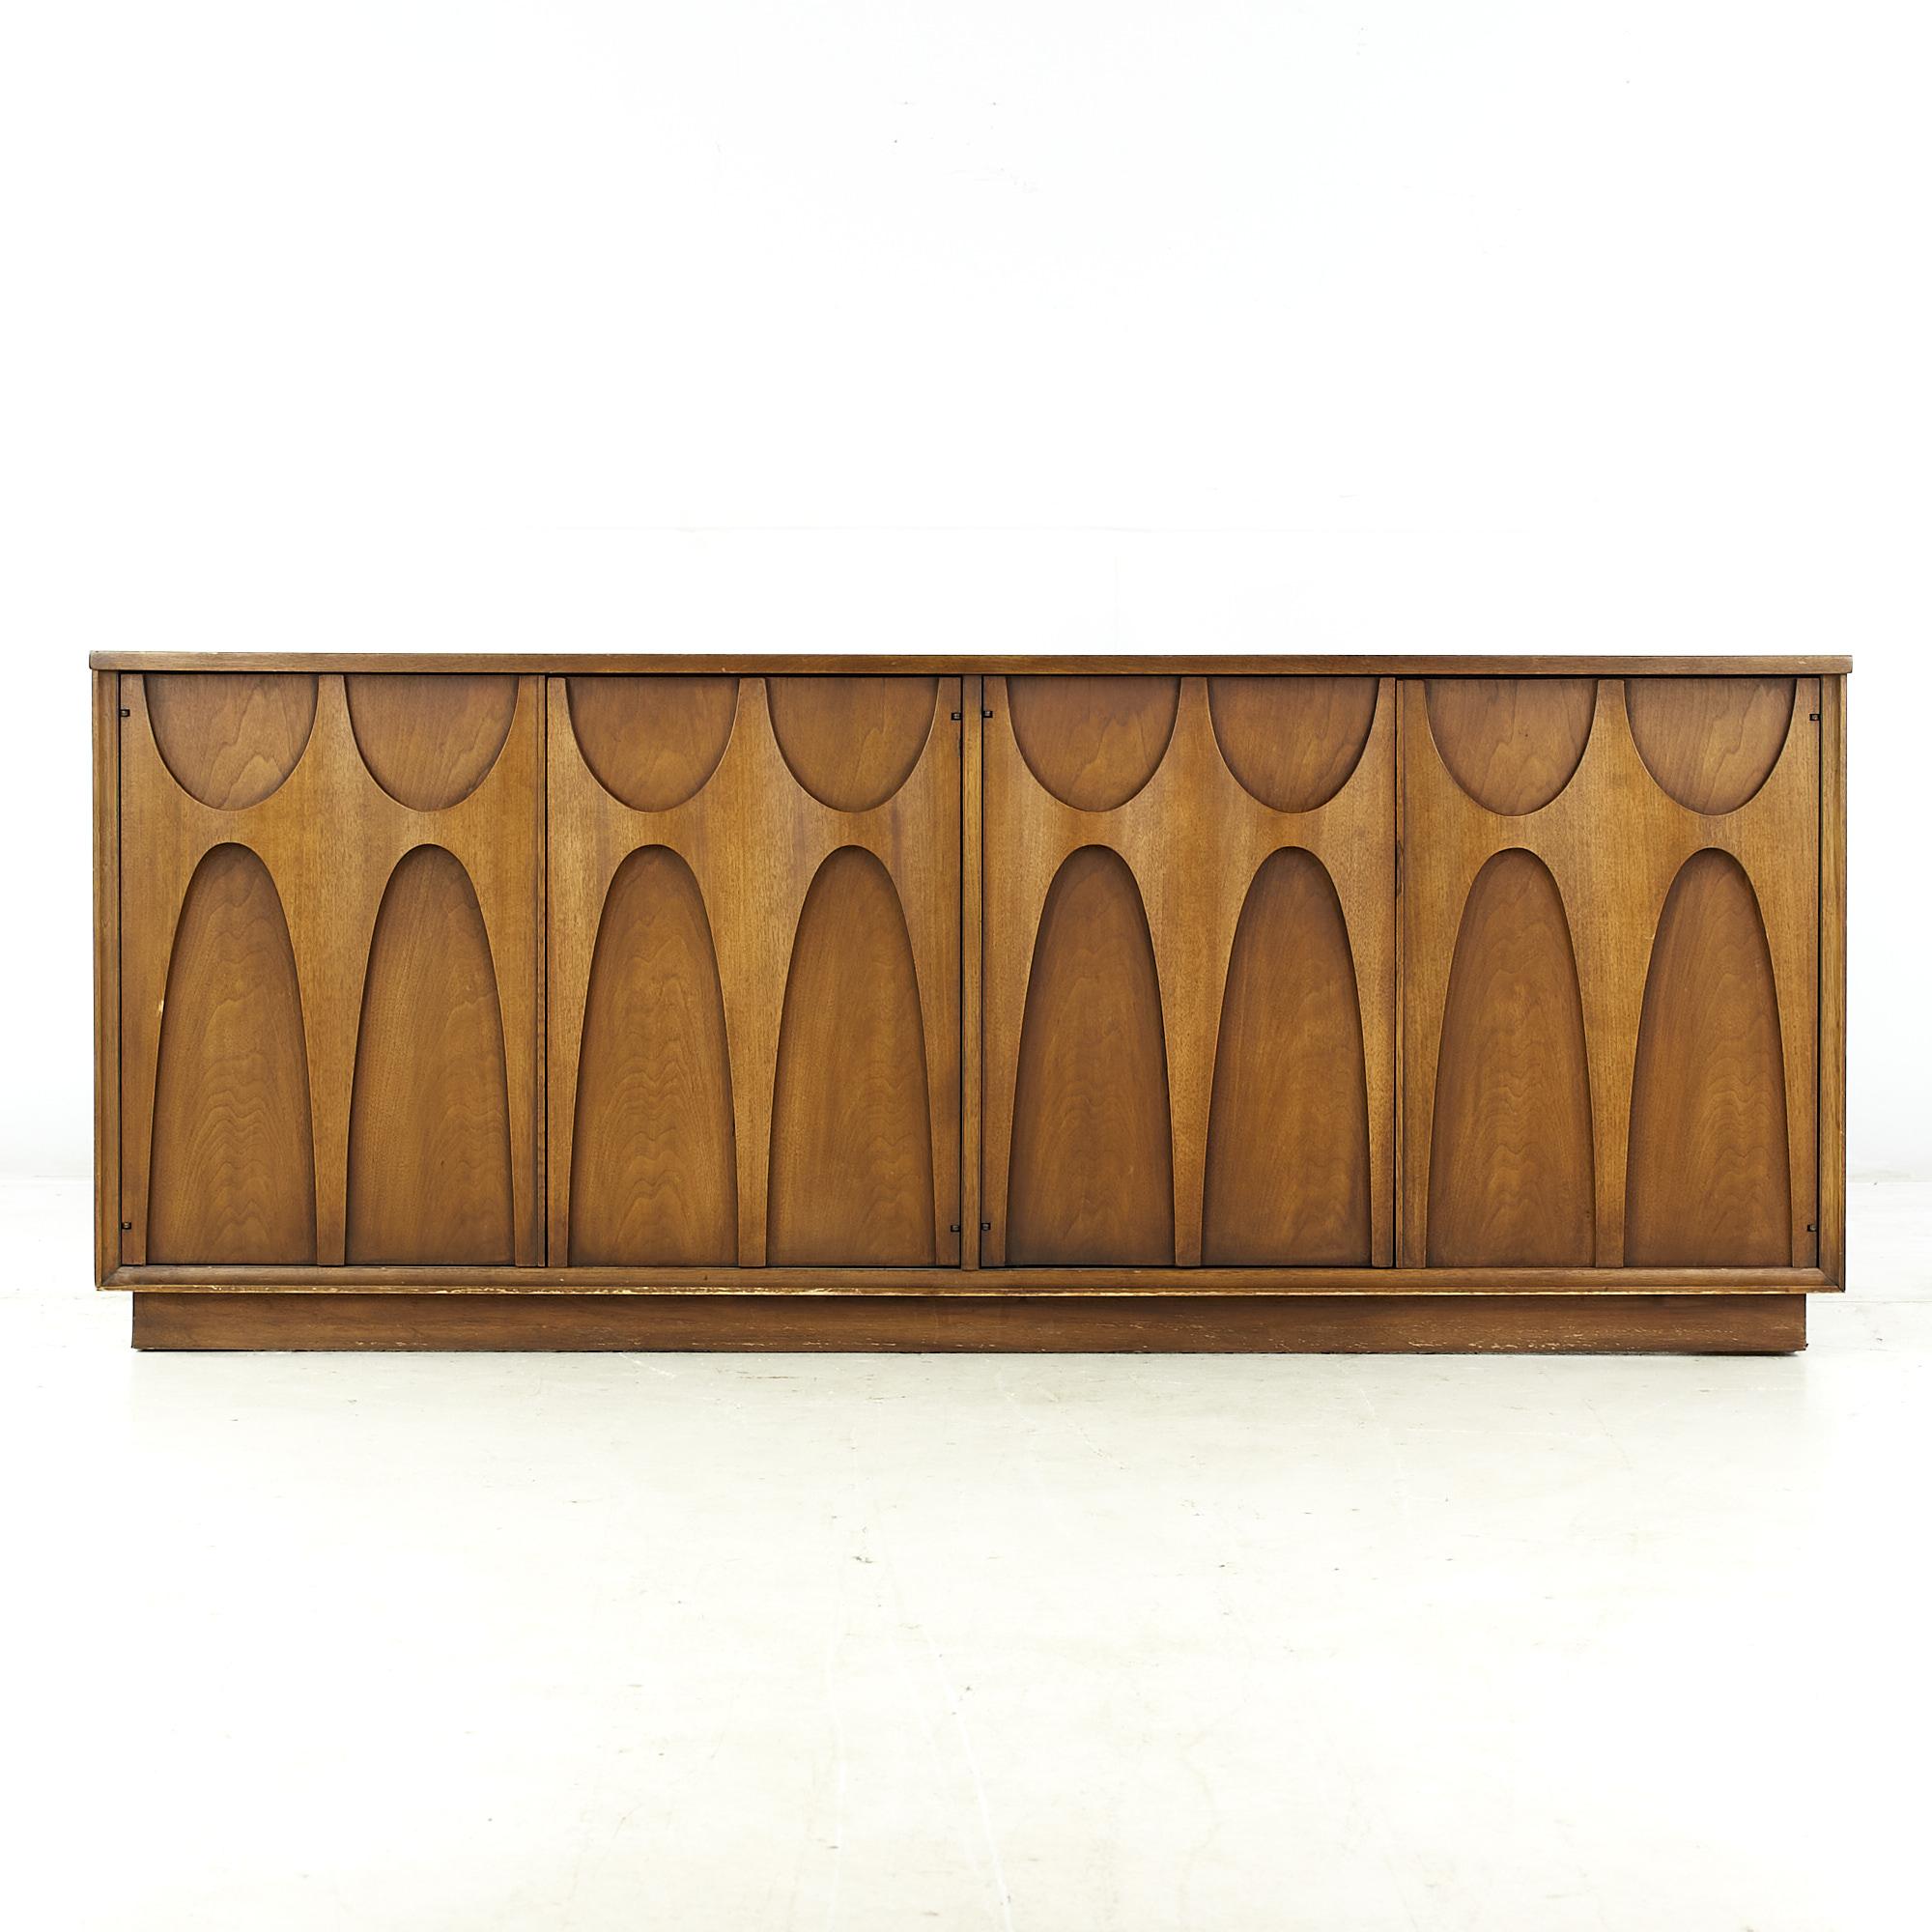 Broyhill Brasilia mid-century walnut plinth base credenza

This credenza measures: 72 wide x 19 deep x 29 inches high

All pieces of furniture can be had in what we call restored vintage condition. That means the piece is restored upon purchase